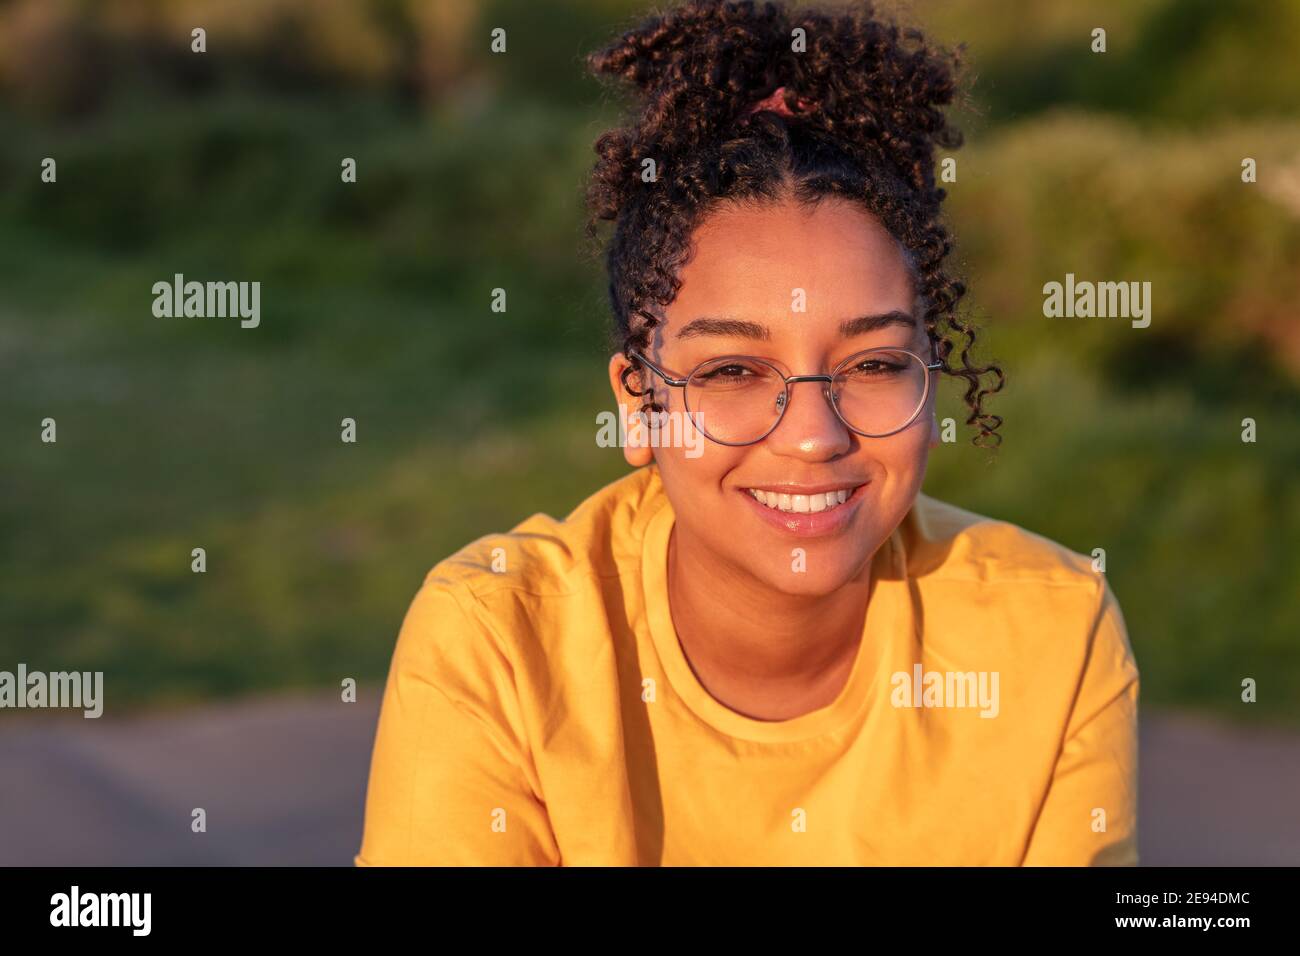 Beautiful biracial mixed race African American teenager teen girl young woman smiling with perfect teeth wearing glasses outside at sunset or sunrise Stock Photo